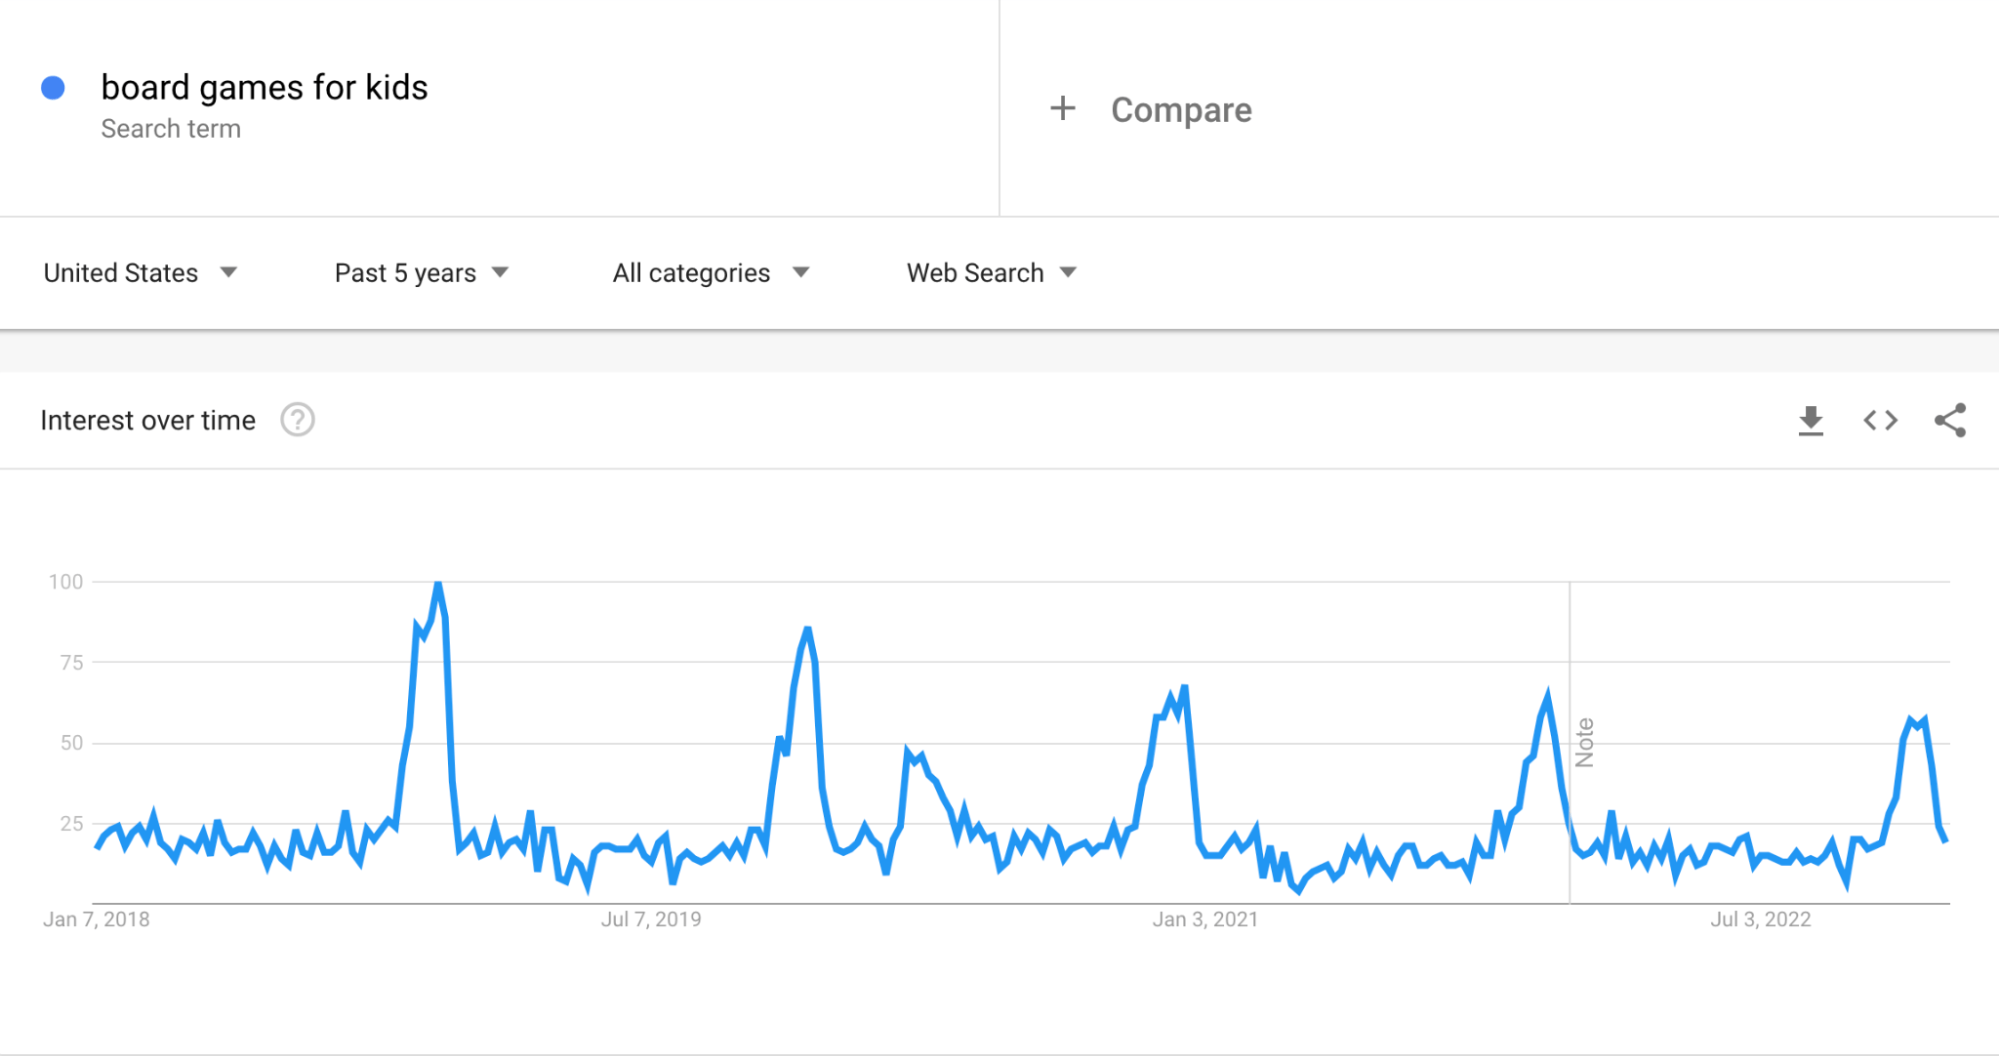 Search trend for "board games for kids"